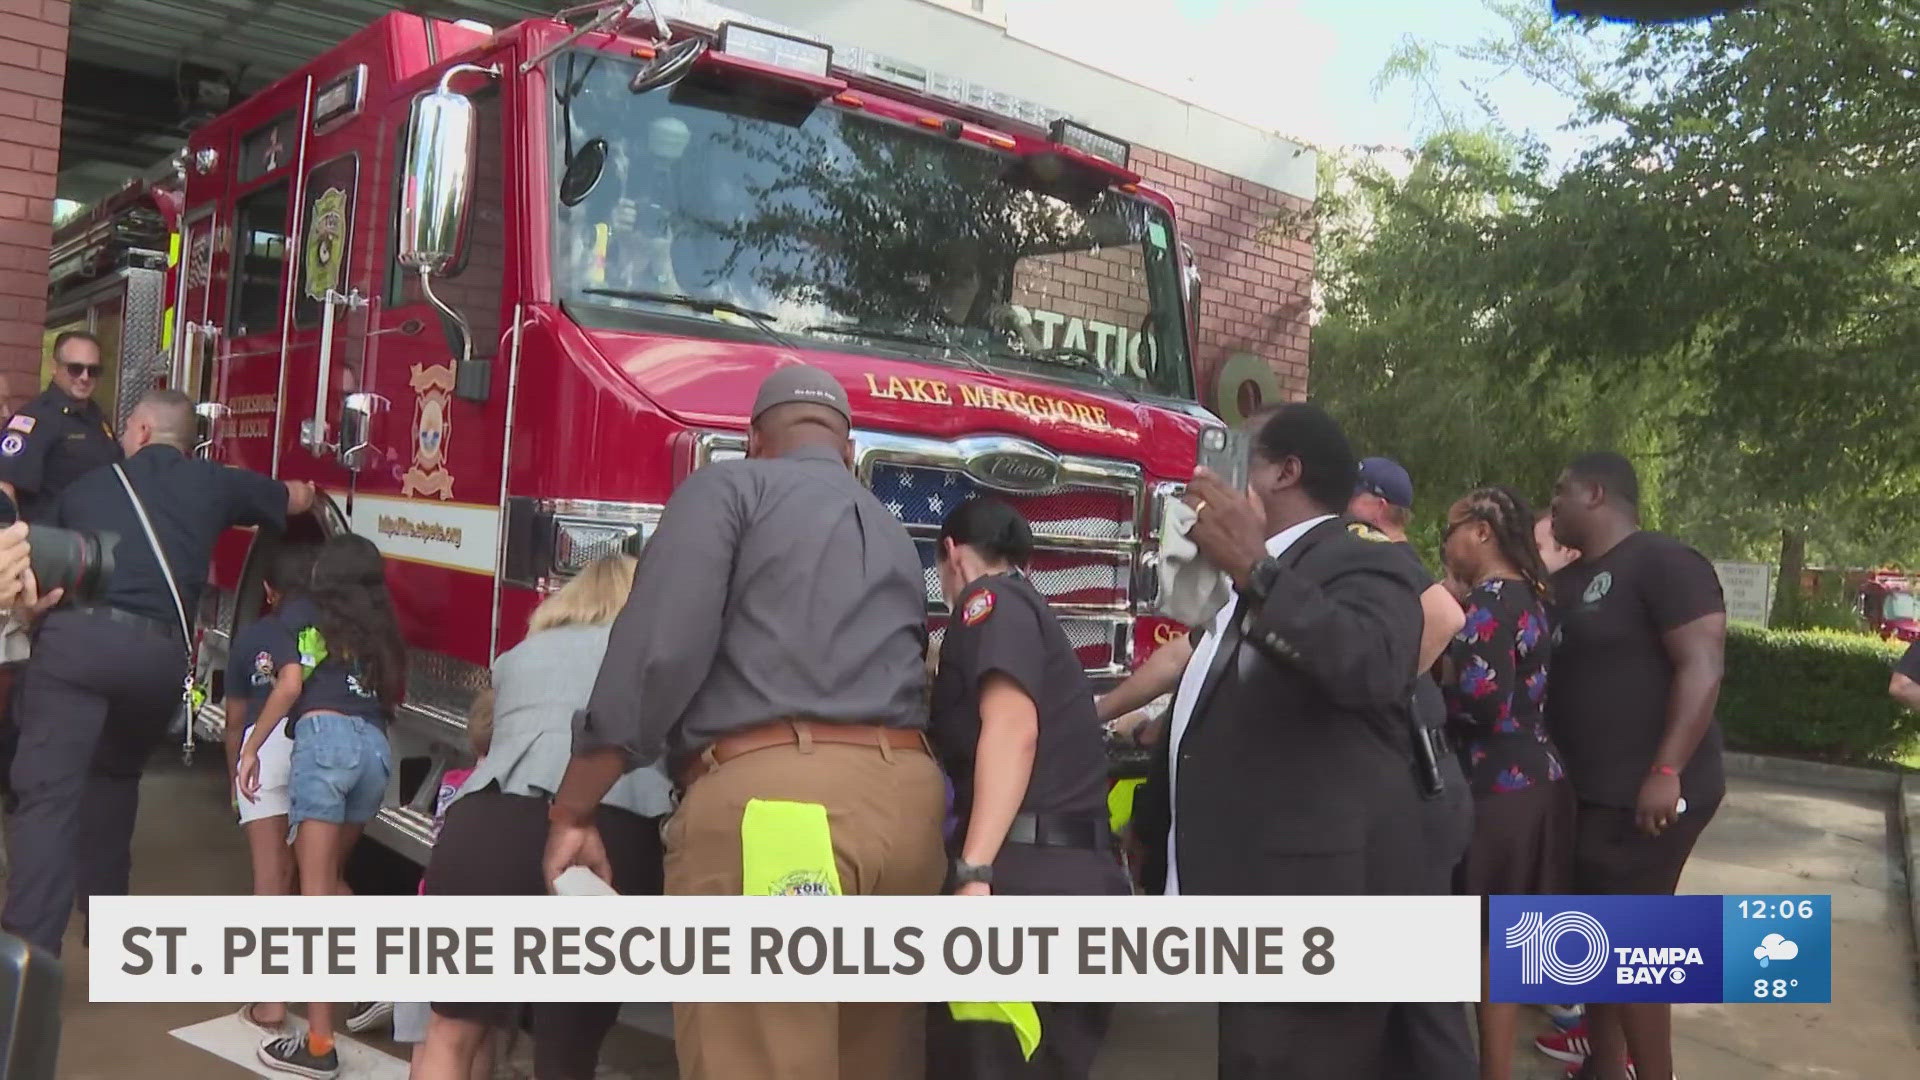 The truck has protections for firefighters against cancer-causing chemicals. The firetruck cost about $800,000.